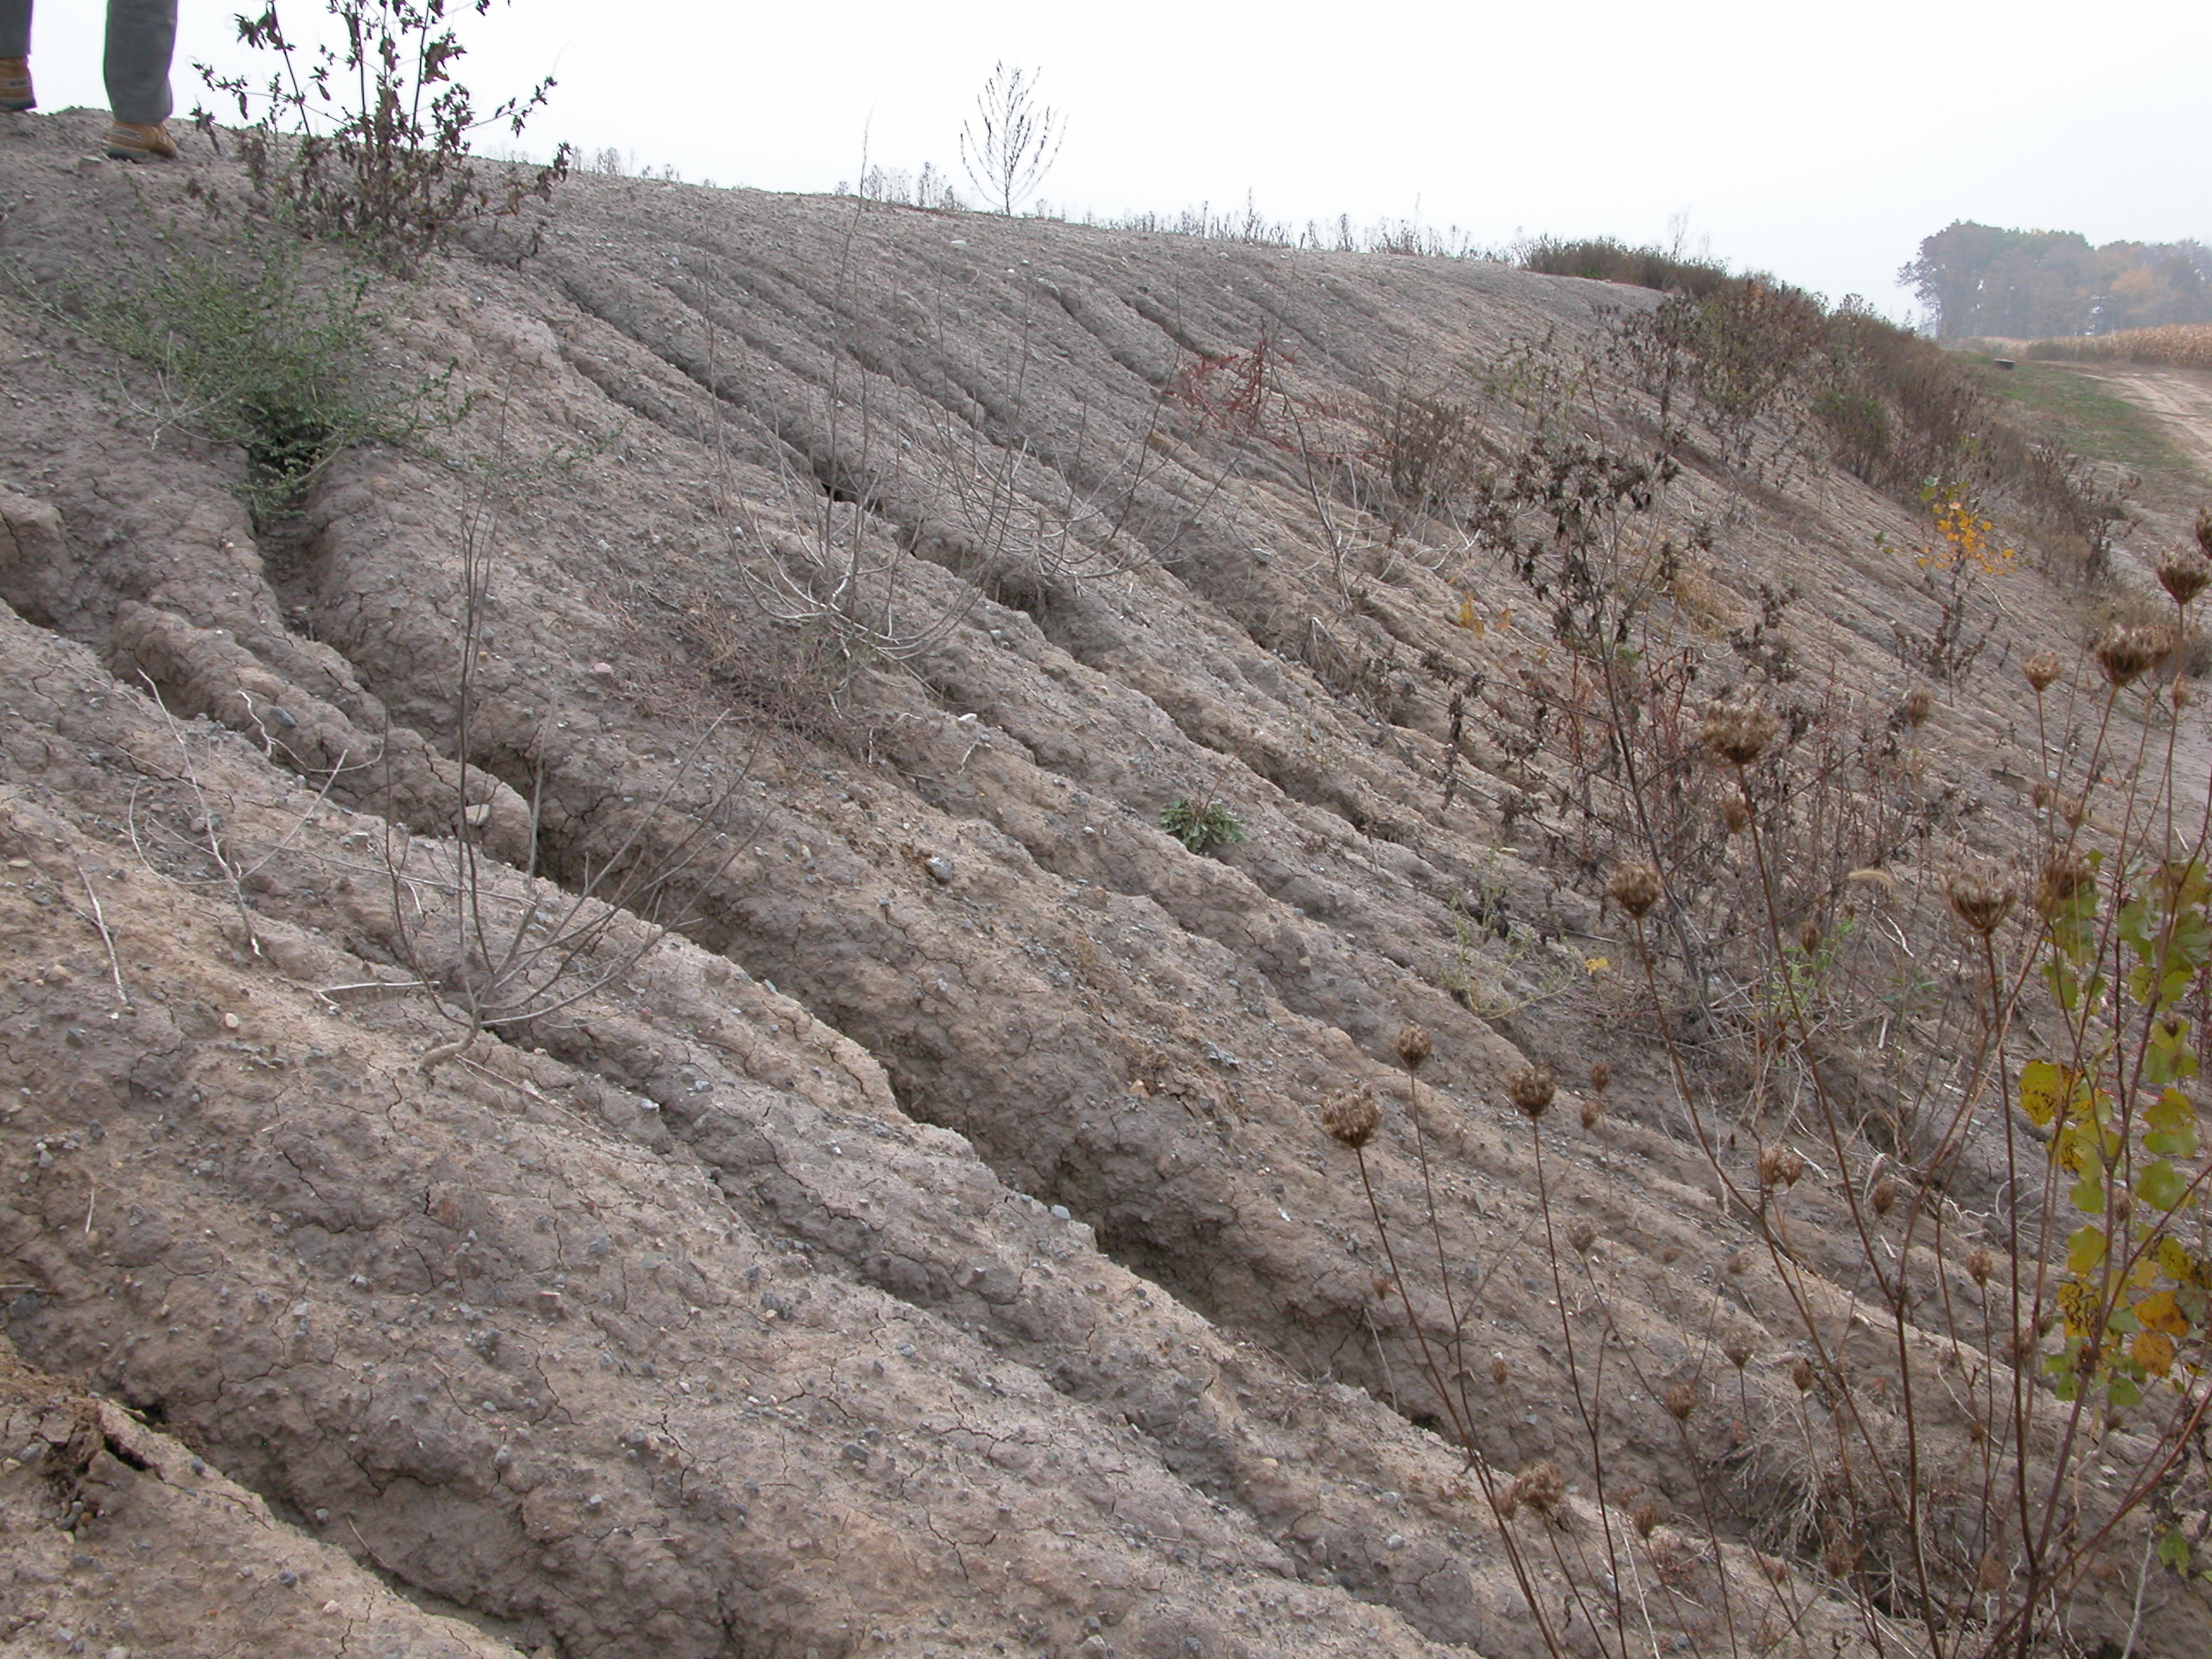 An example of a serious erosion problem because the bank was not re-seeded